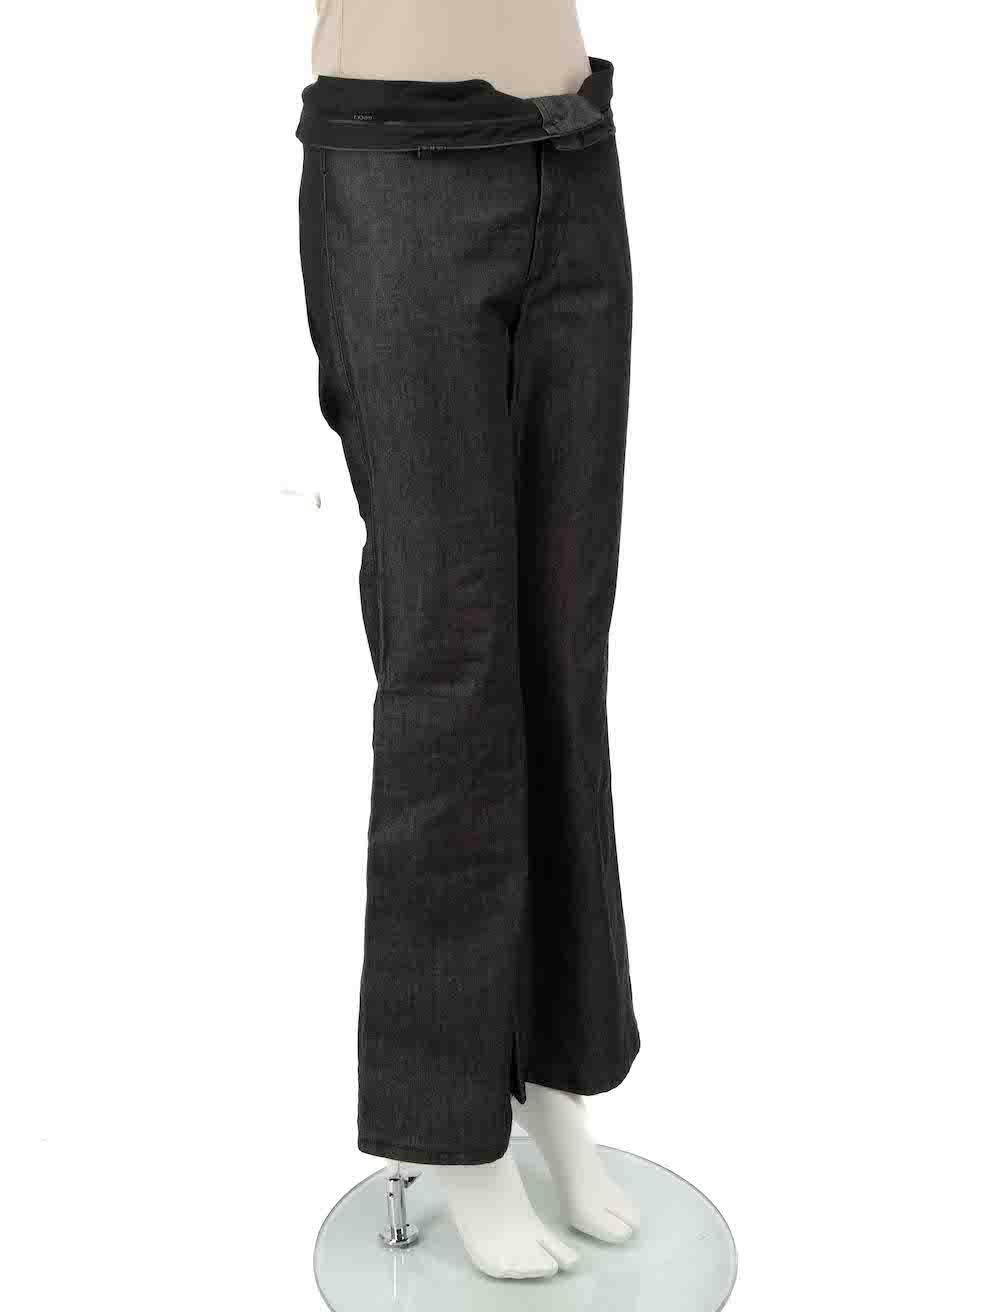 CONDITION is Very good. Hardly any visible wear to trousers is evident on this used Gucci designer resale item.
 
 
 
 Details
 
 
 Grey
 
 Cotton
 
 Trousers
 
 Flipped waistband detail
 
 Mid rise
 
 Flared leg
 
 Fly zip and button fastening
 
 
